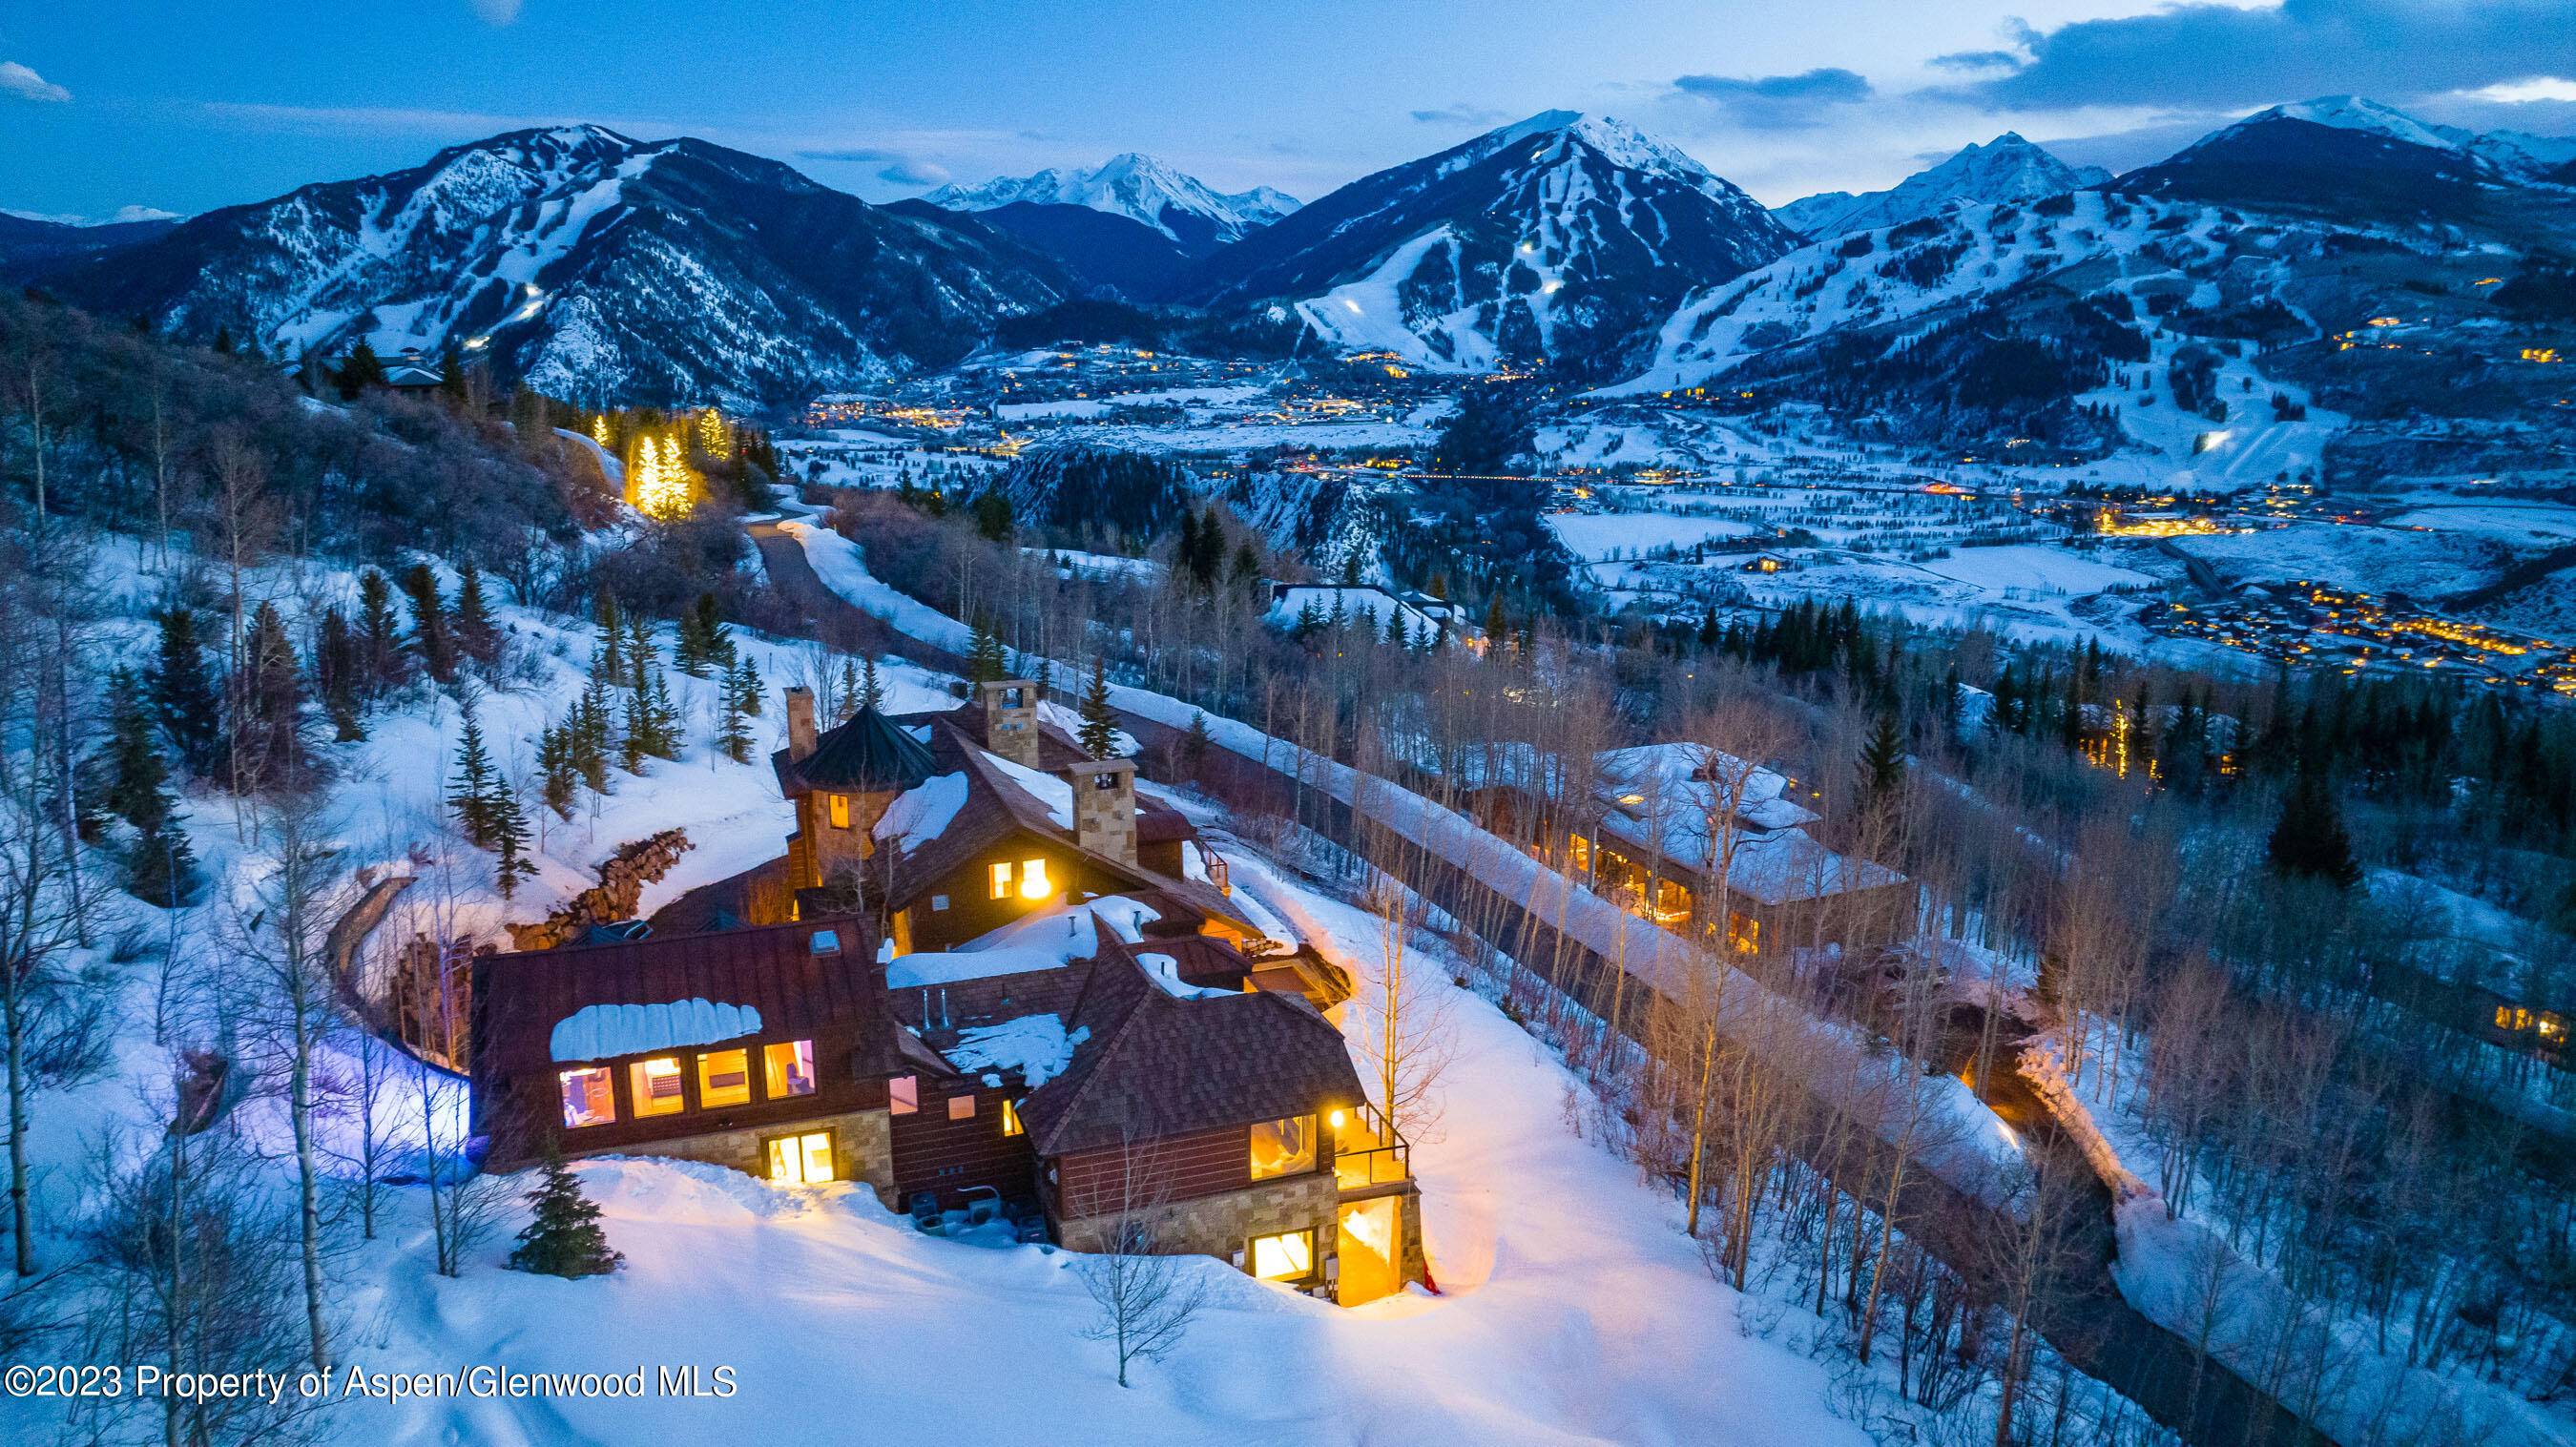 Starwood above Aspen is known for its incredible vistas.